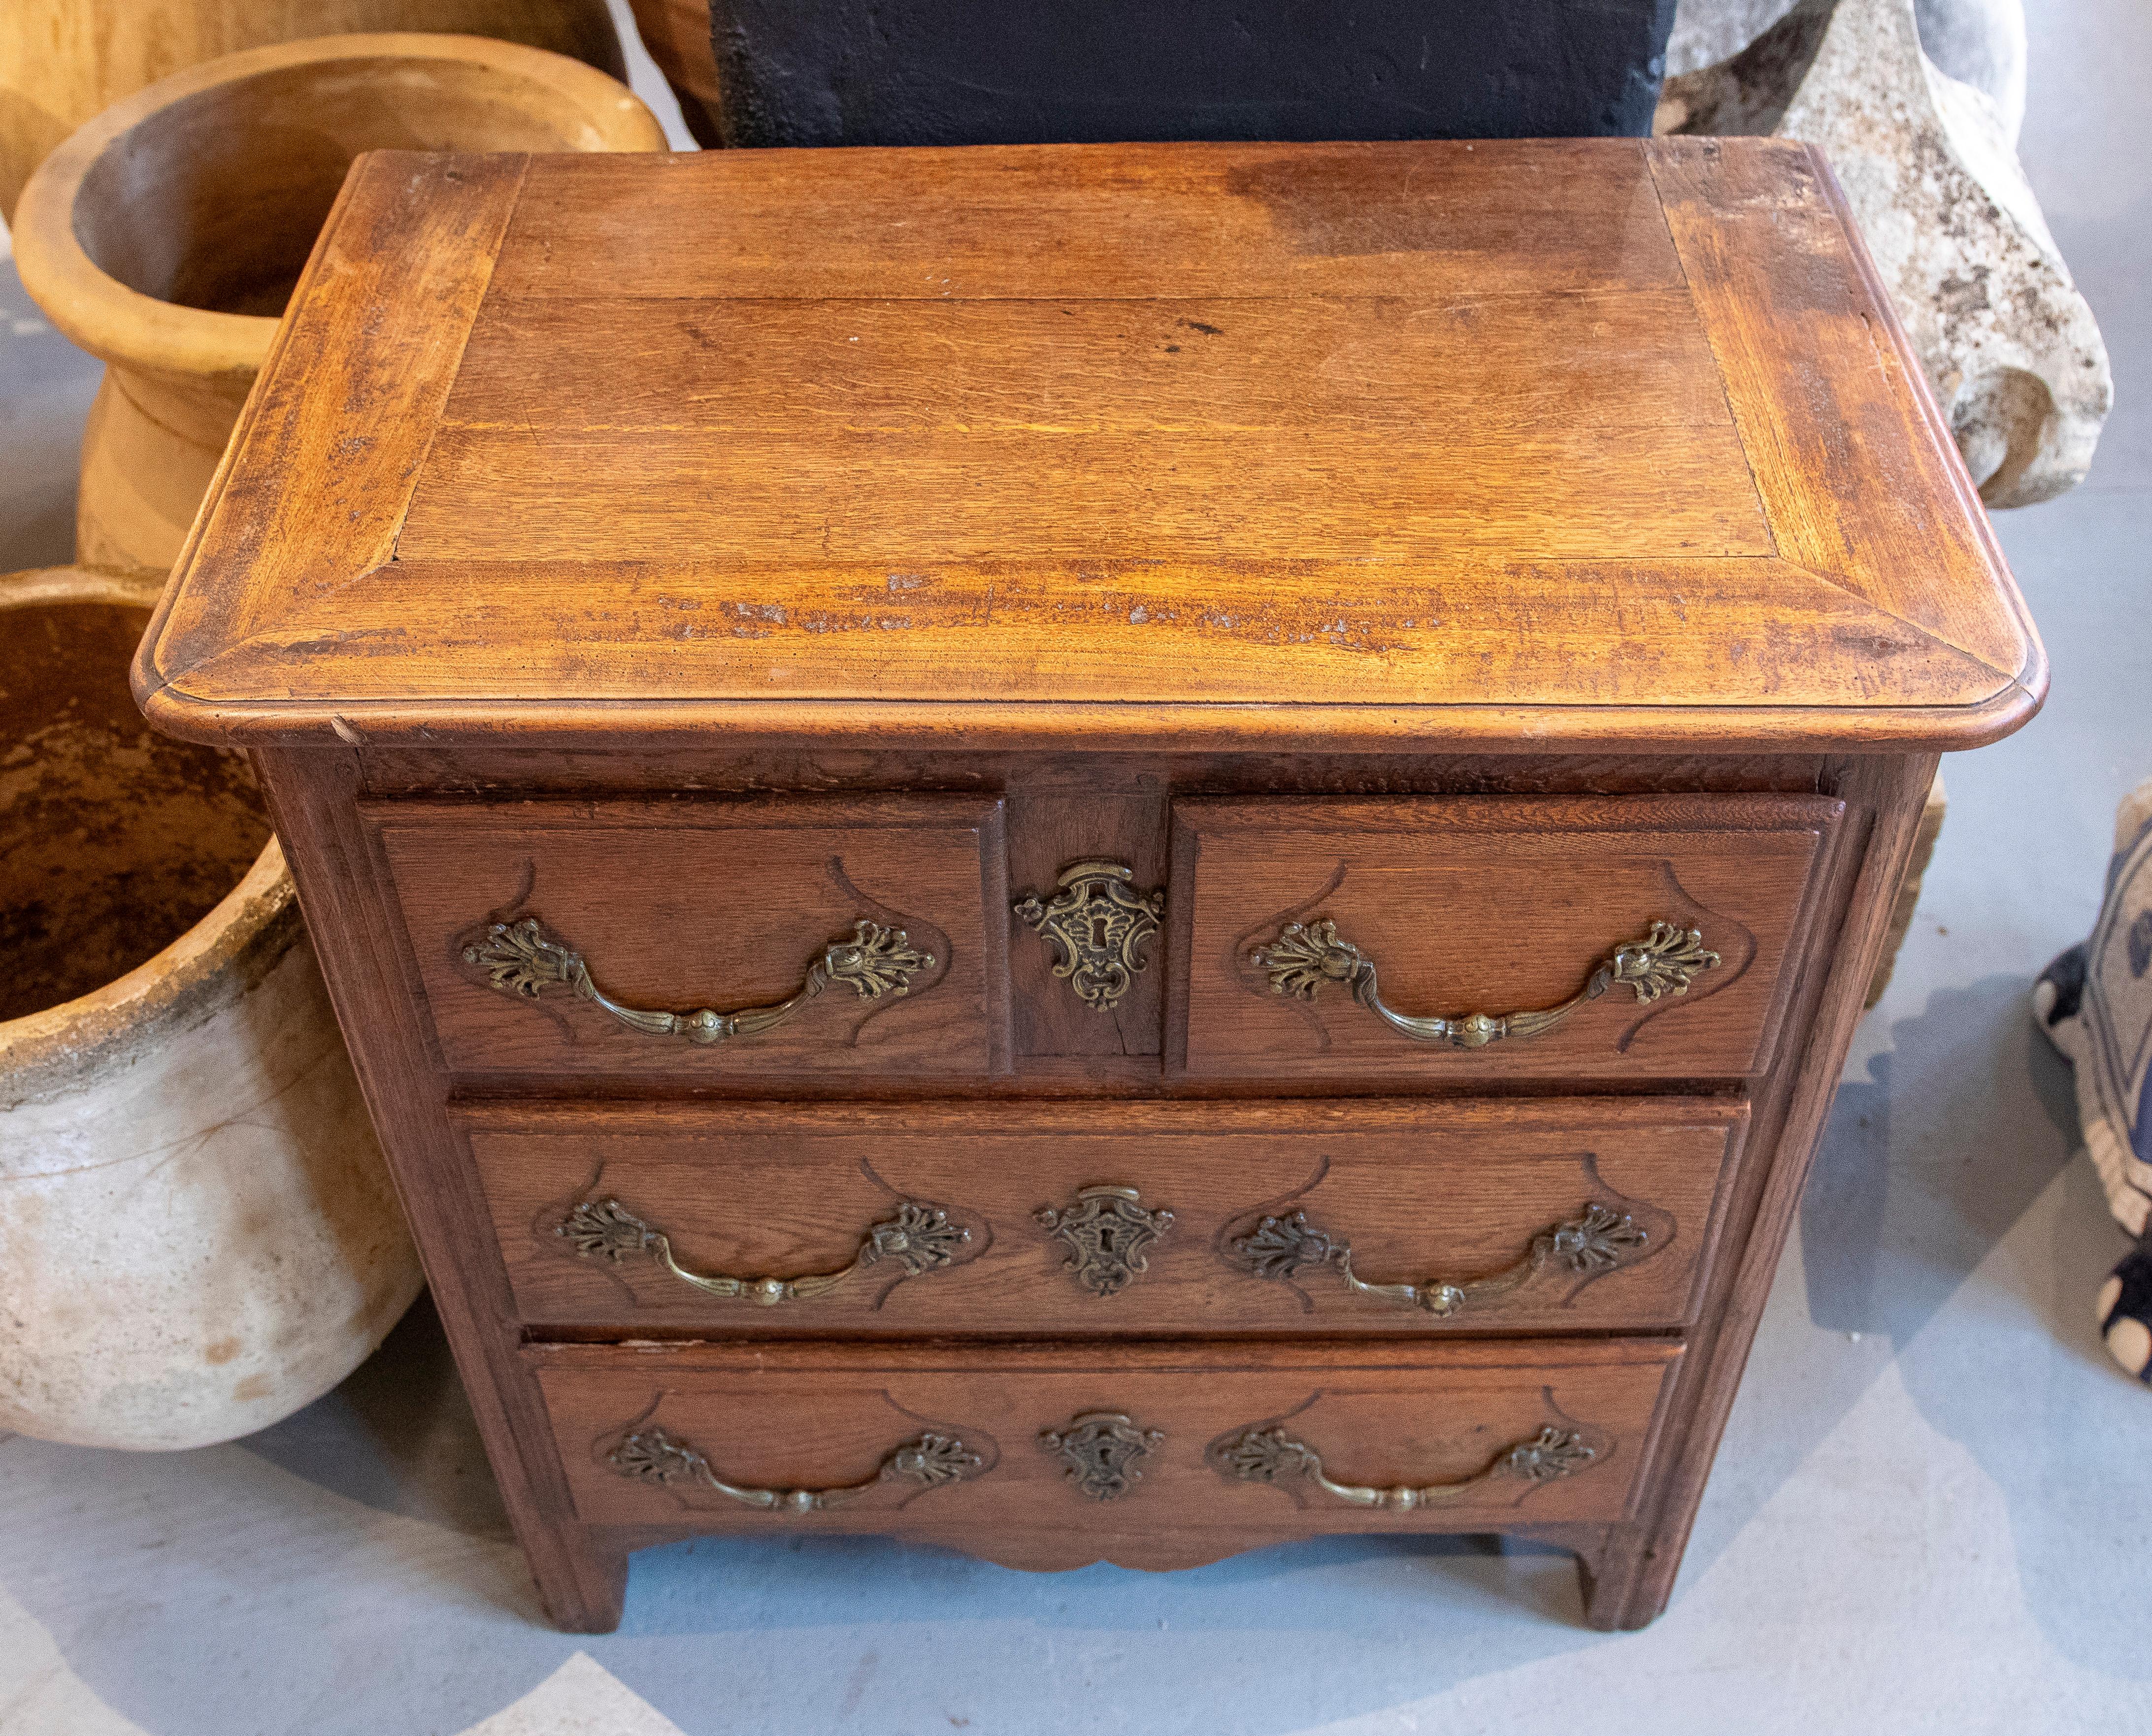 19th Century English Wooden Chest of Drawers with Three Drawers and Iron Fitting For Sale 5